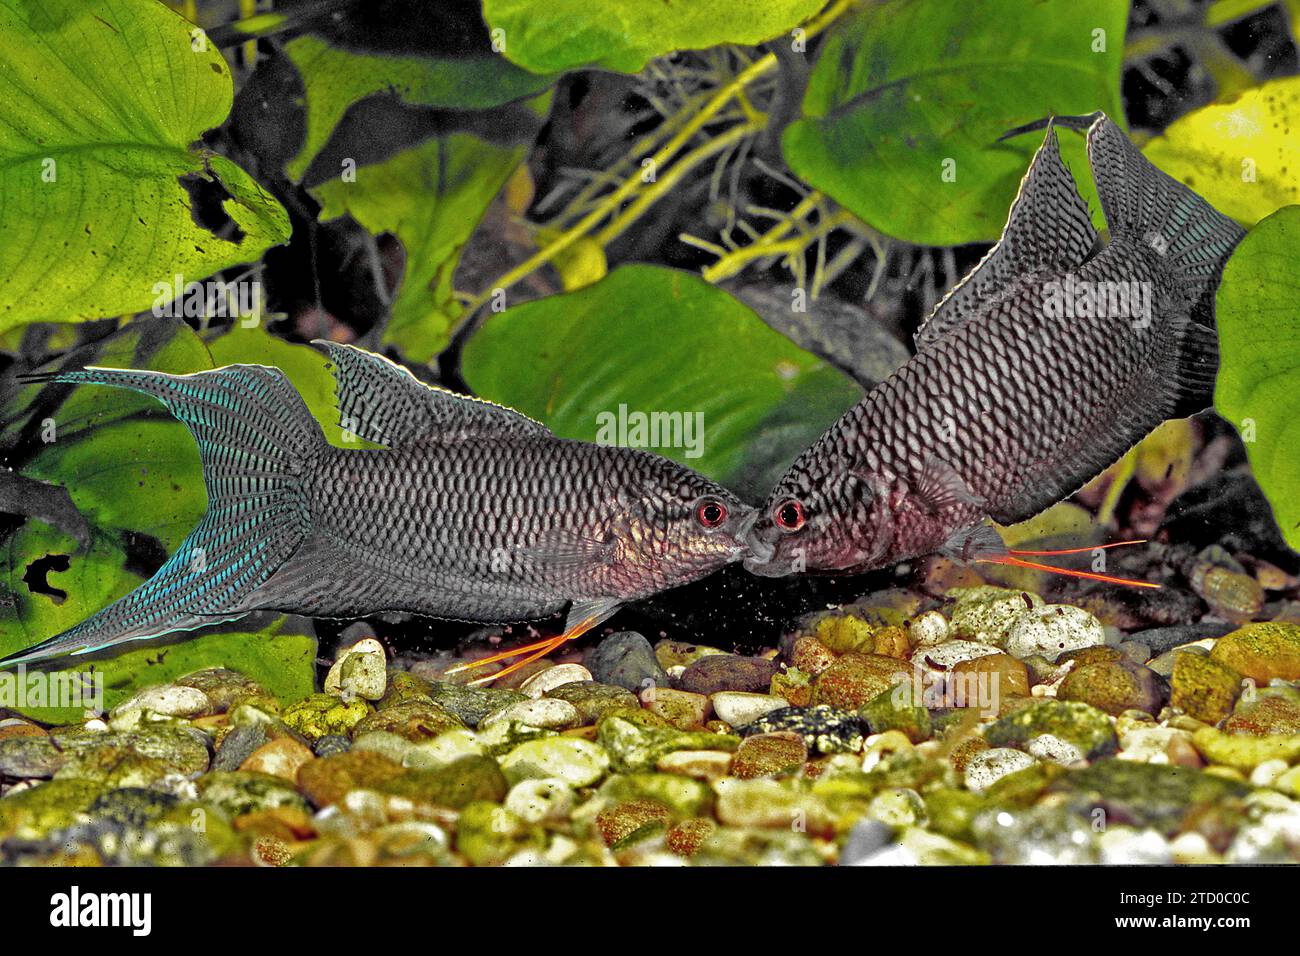 Black paradisefish, Black paradise fish (Macropodus spechti, Macropodus concolor), mouth-fighting males Stock Photo